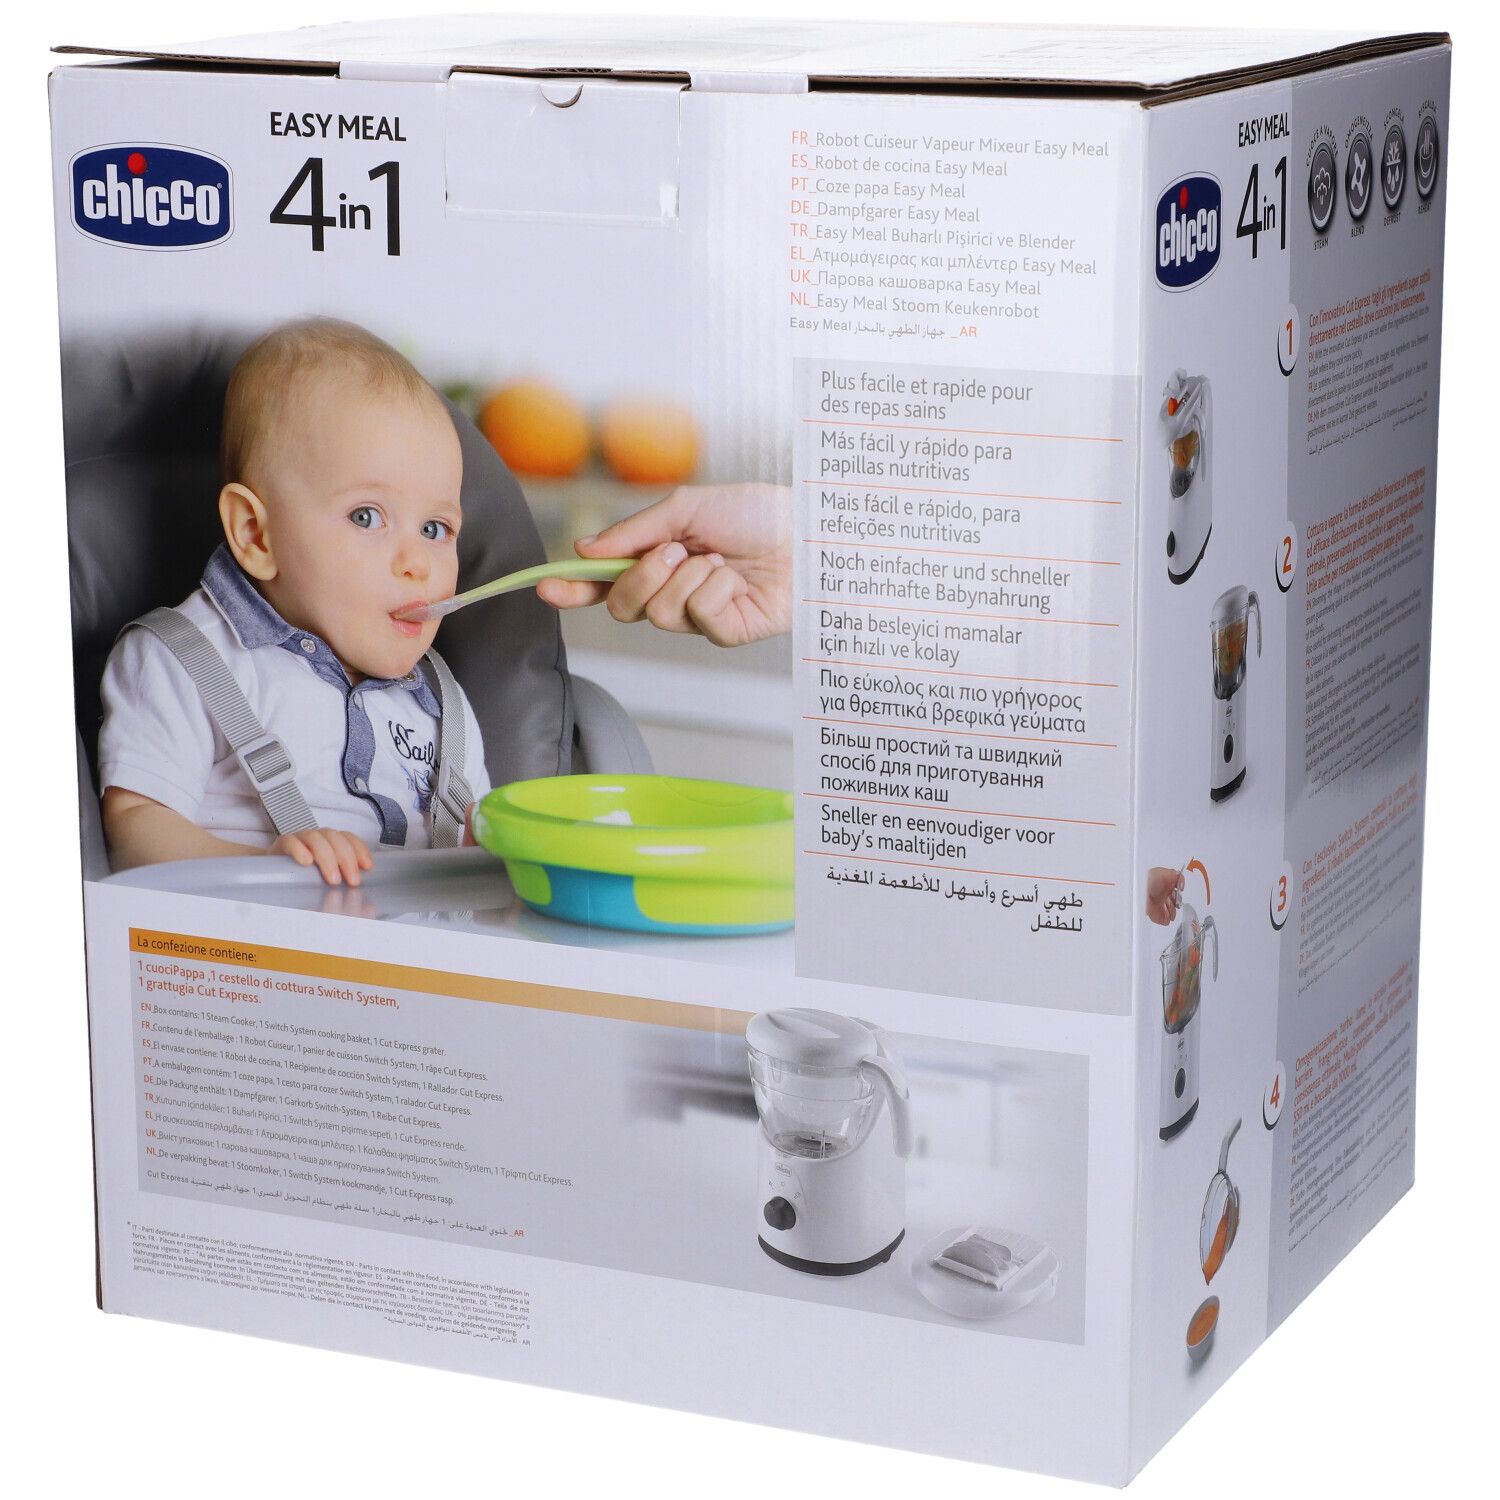 Chicco Cuocipappa Easy Meal